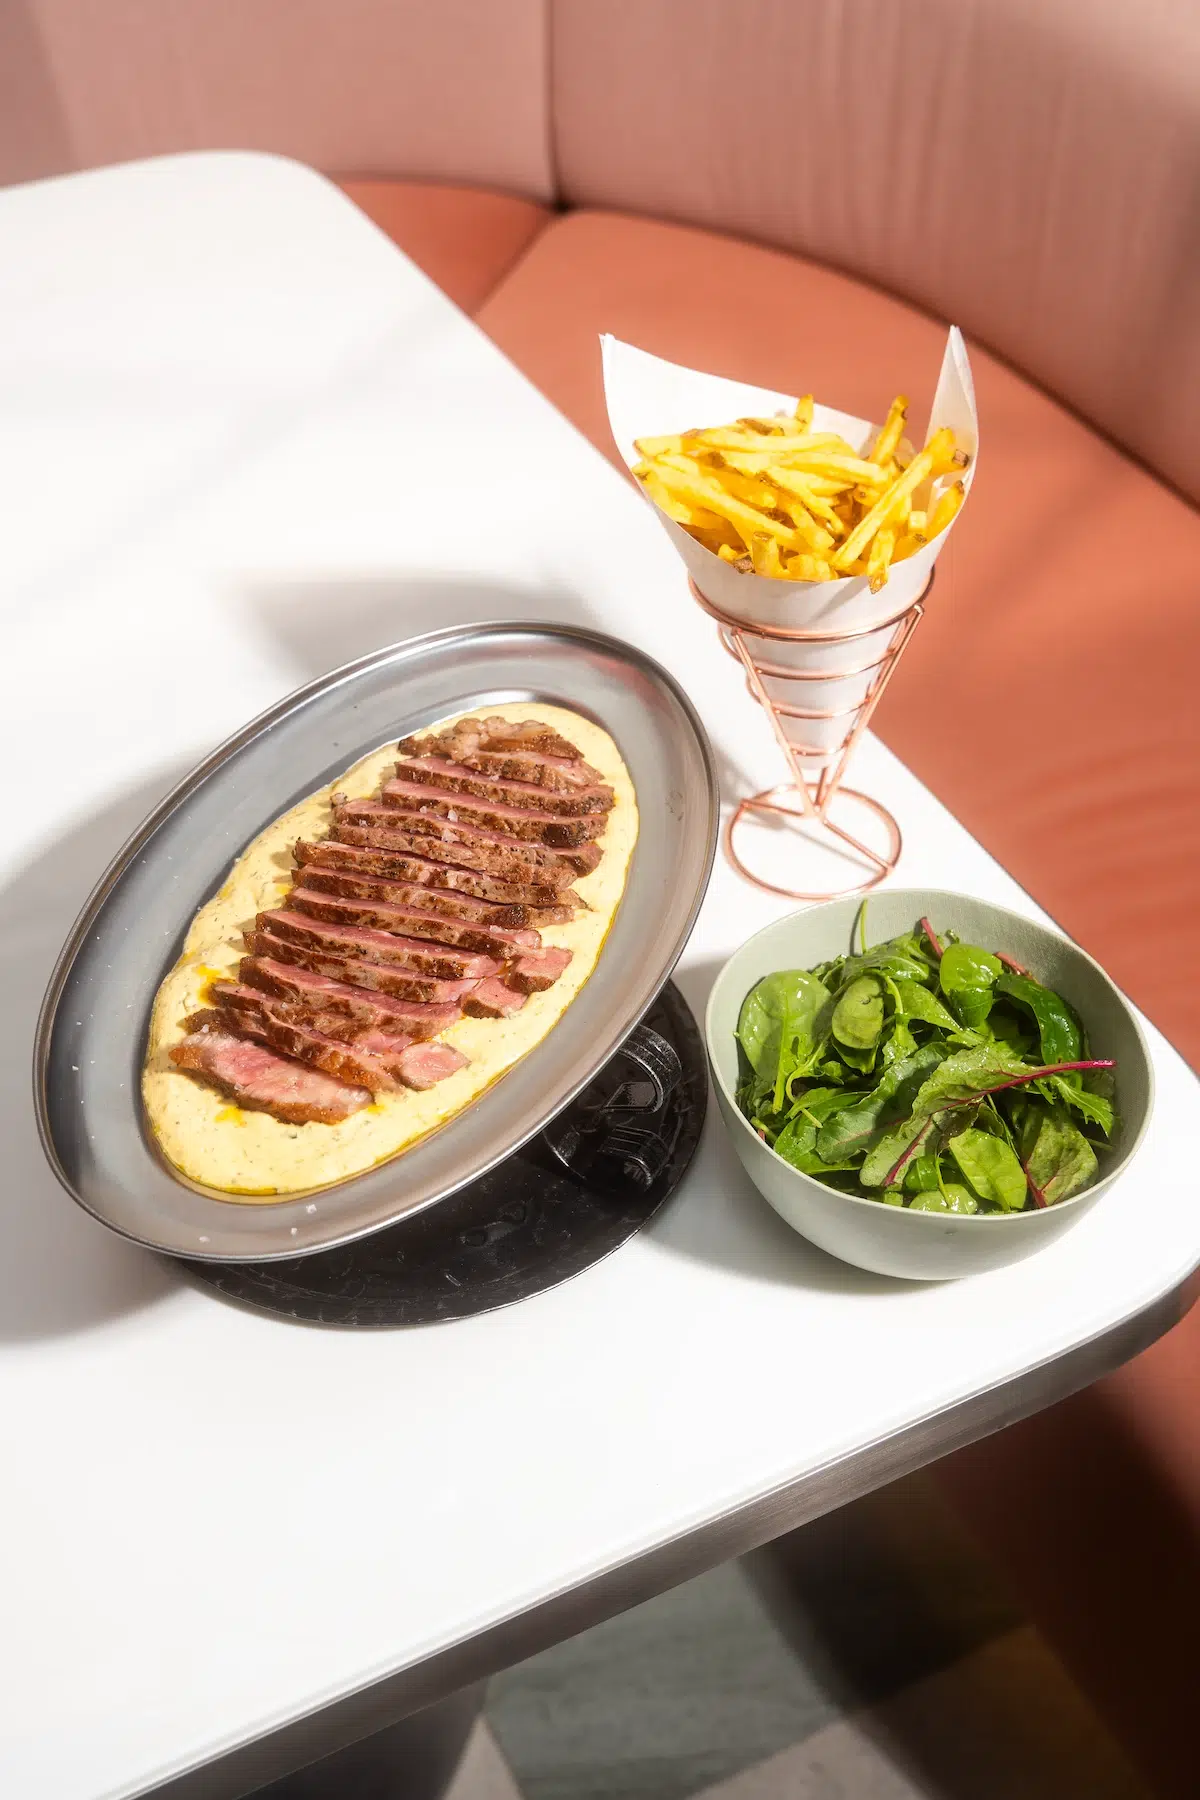 This is the wonderful Entrecote Double Cafe de Paris, served with french fries and salad, from Mami Rose Restaurant located in EmSphere mall in Bangkok near Sukhumvit IKEA.